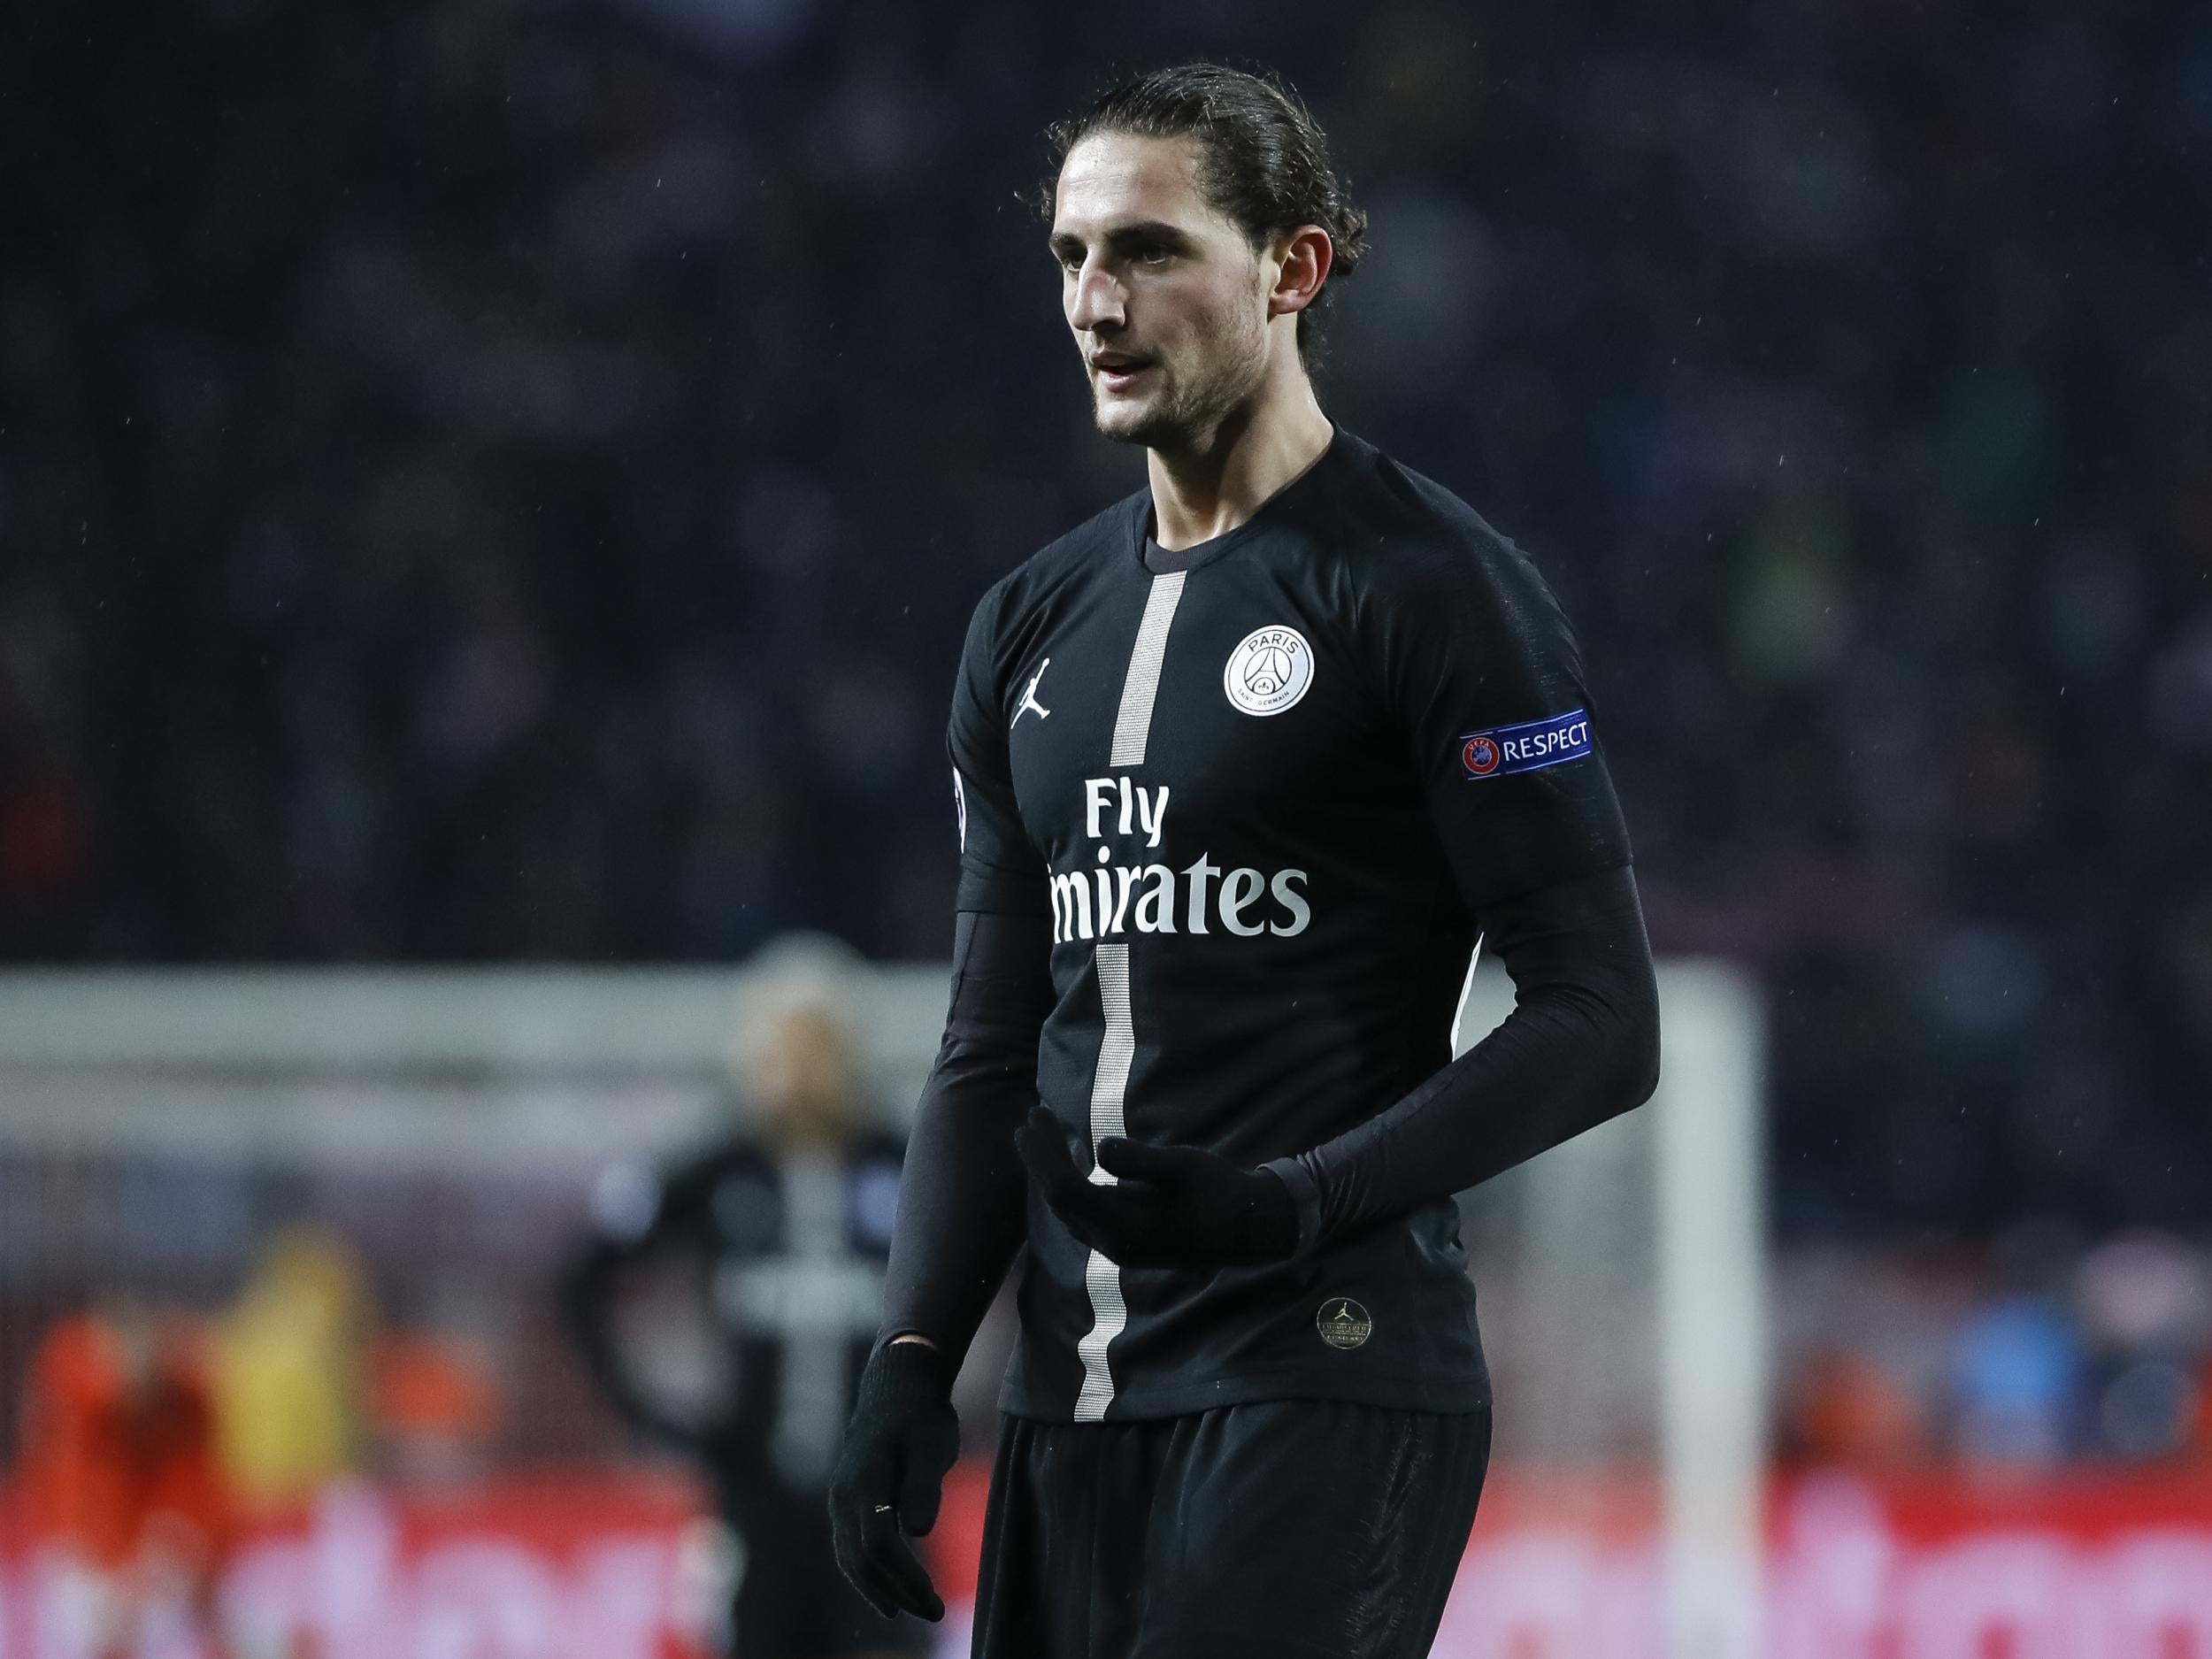 The midfielder's PSG contract expires at the end of the season